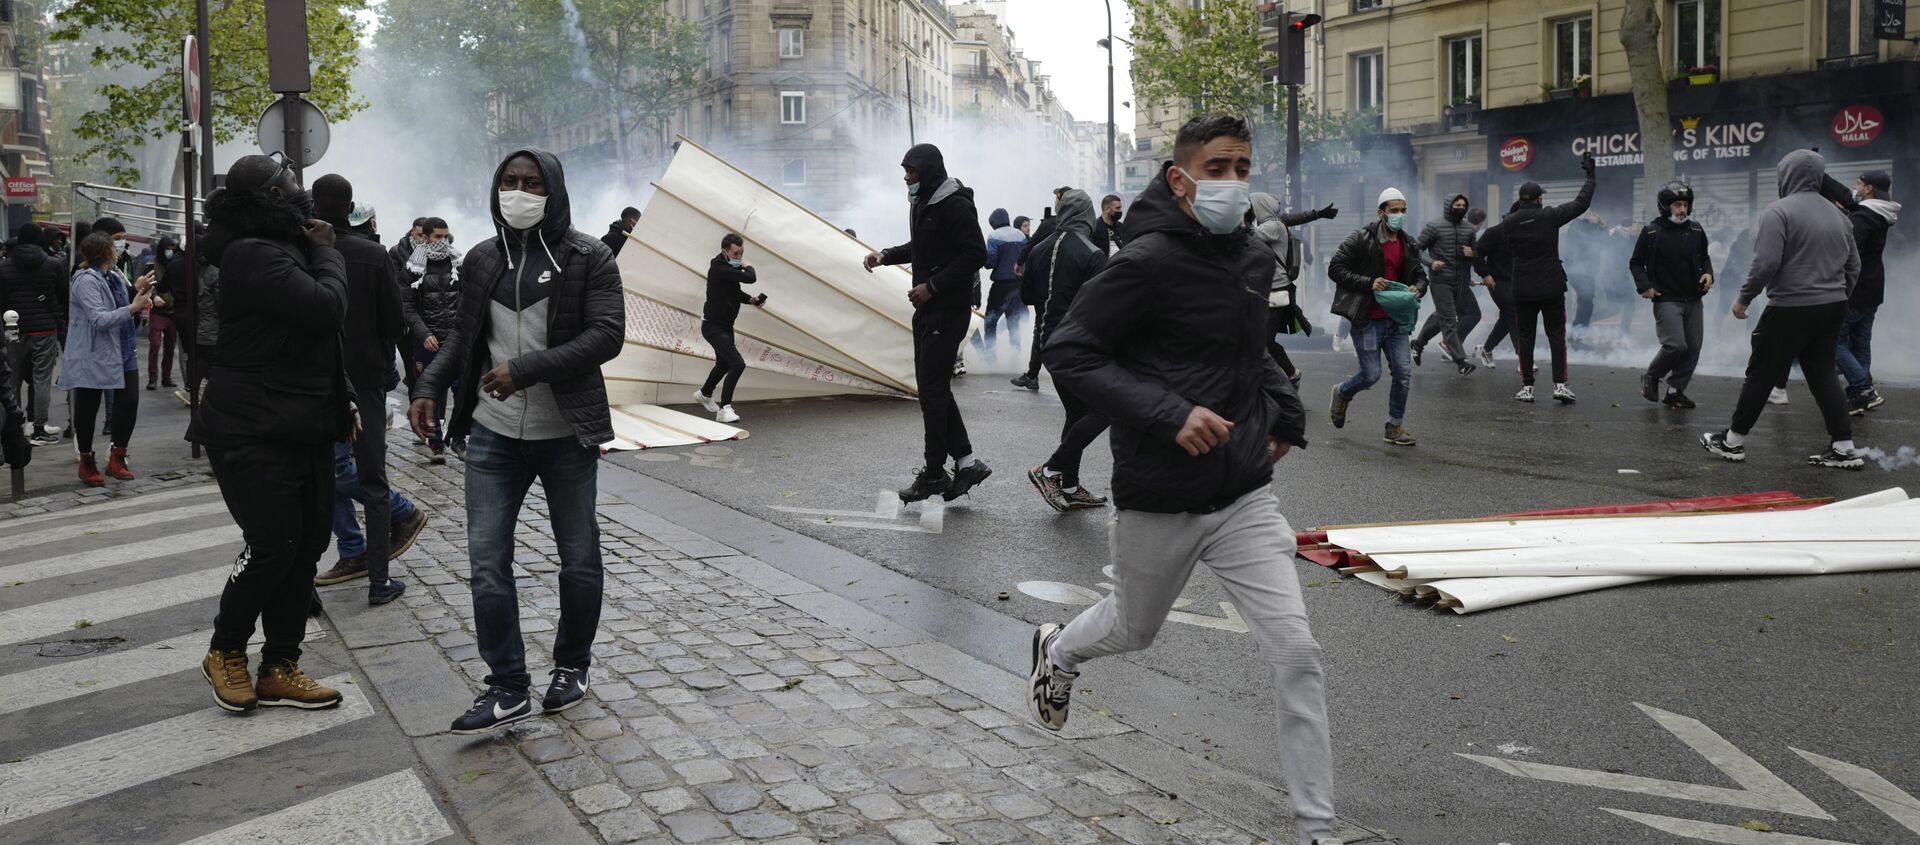 Youths run away during a banned protest in support of Palestinians in the Gaza Strip, in Paris, Saturday, May, 15, 2021. - Sputnik International, 1920, 22.05.2021